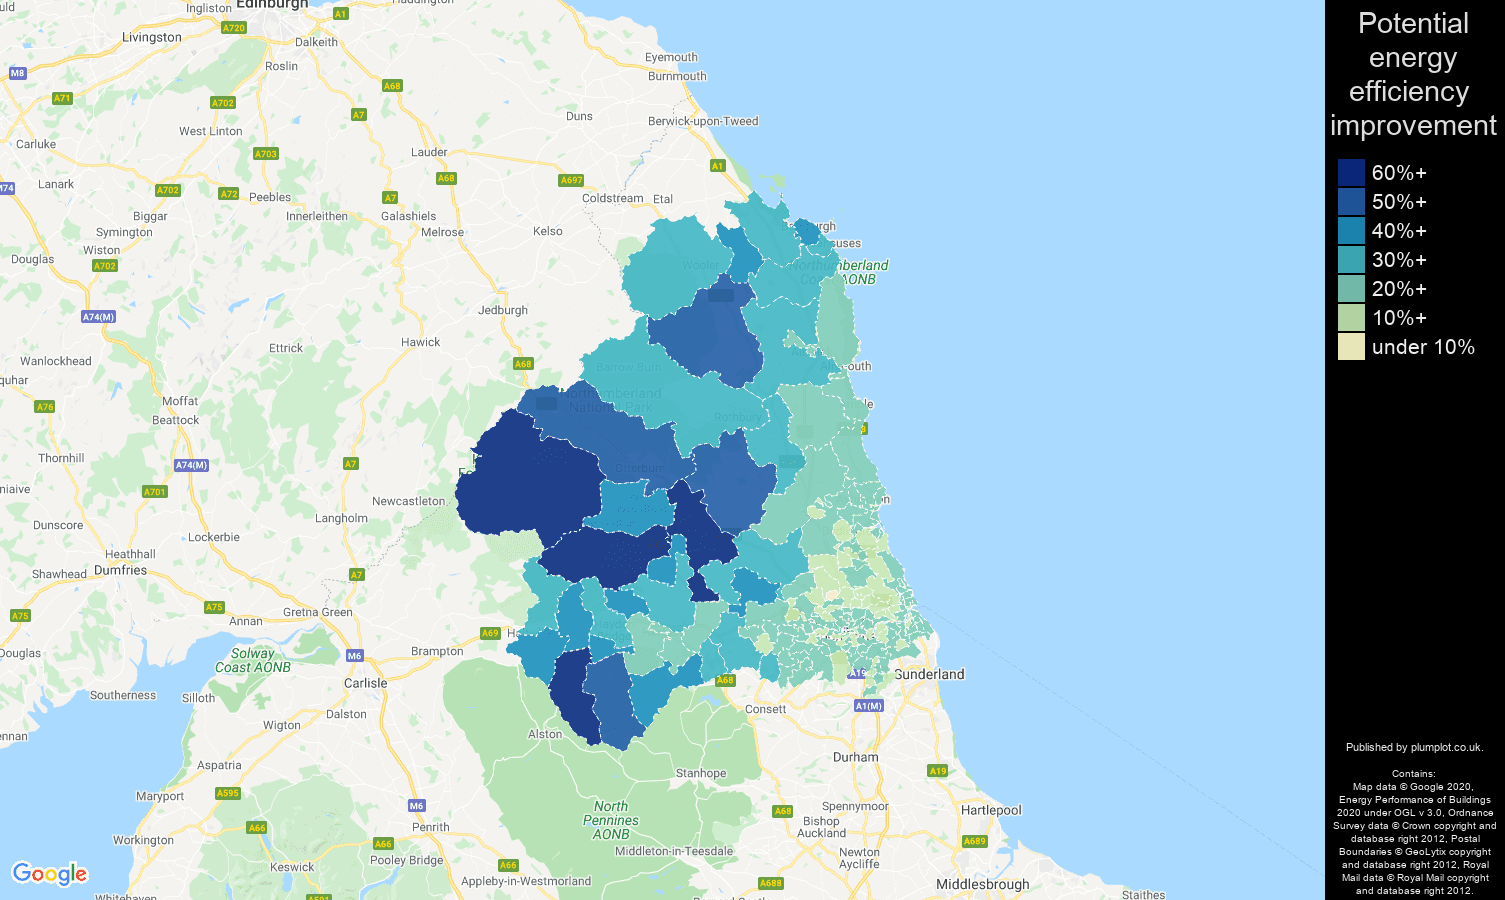 Newcastle upon Tyne map of potential energy efficiency improvement of houses